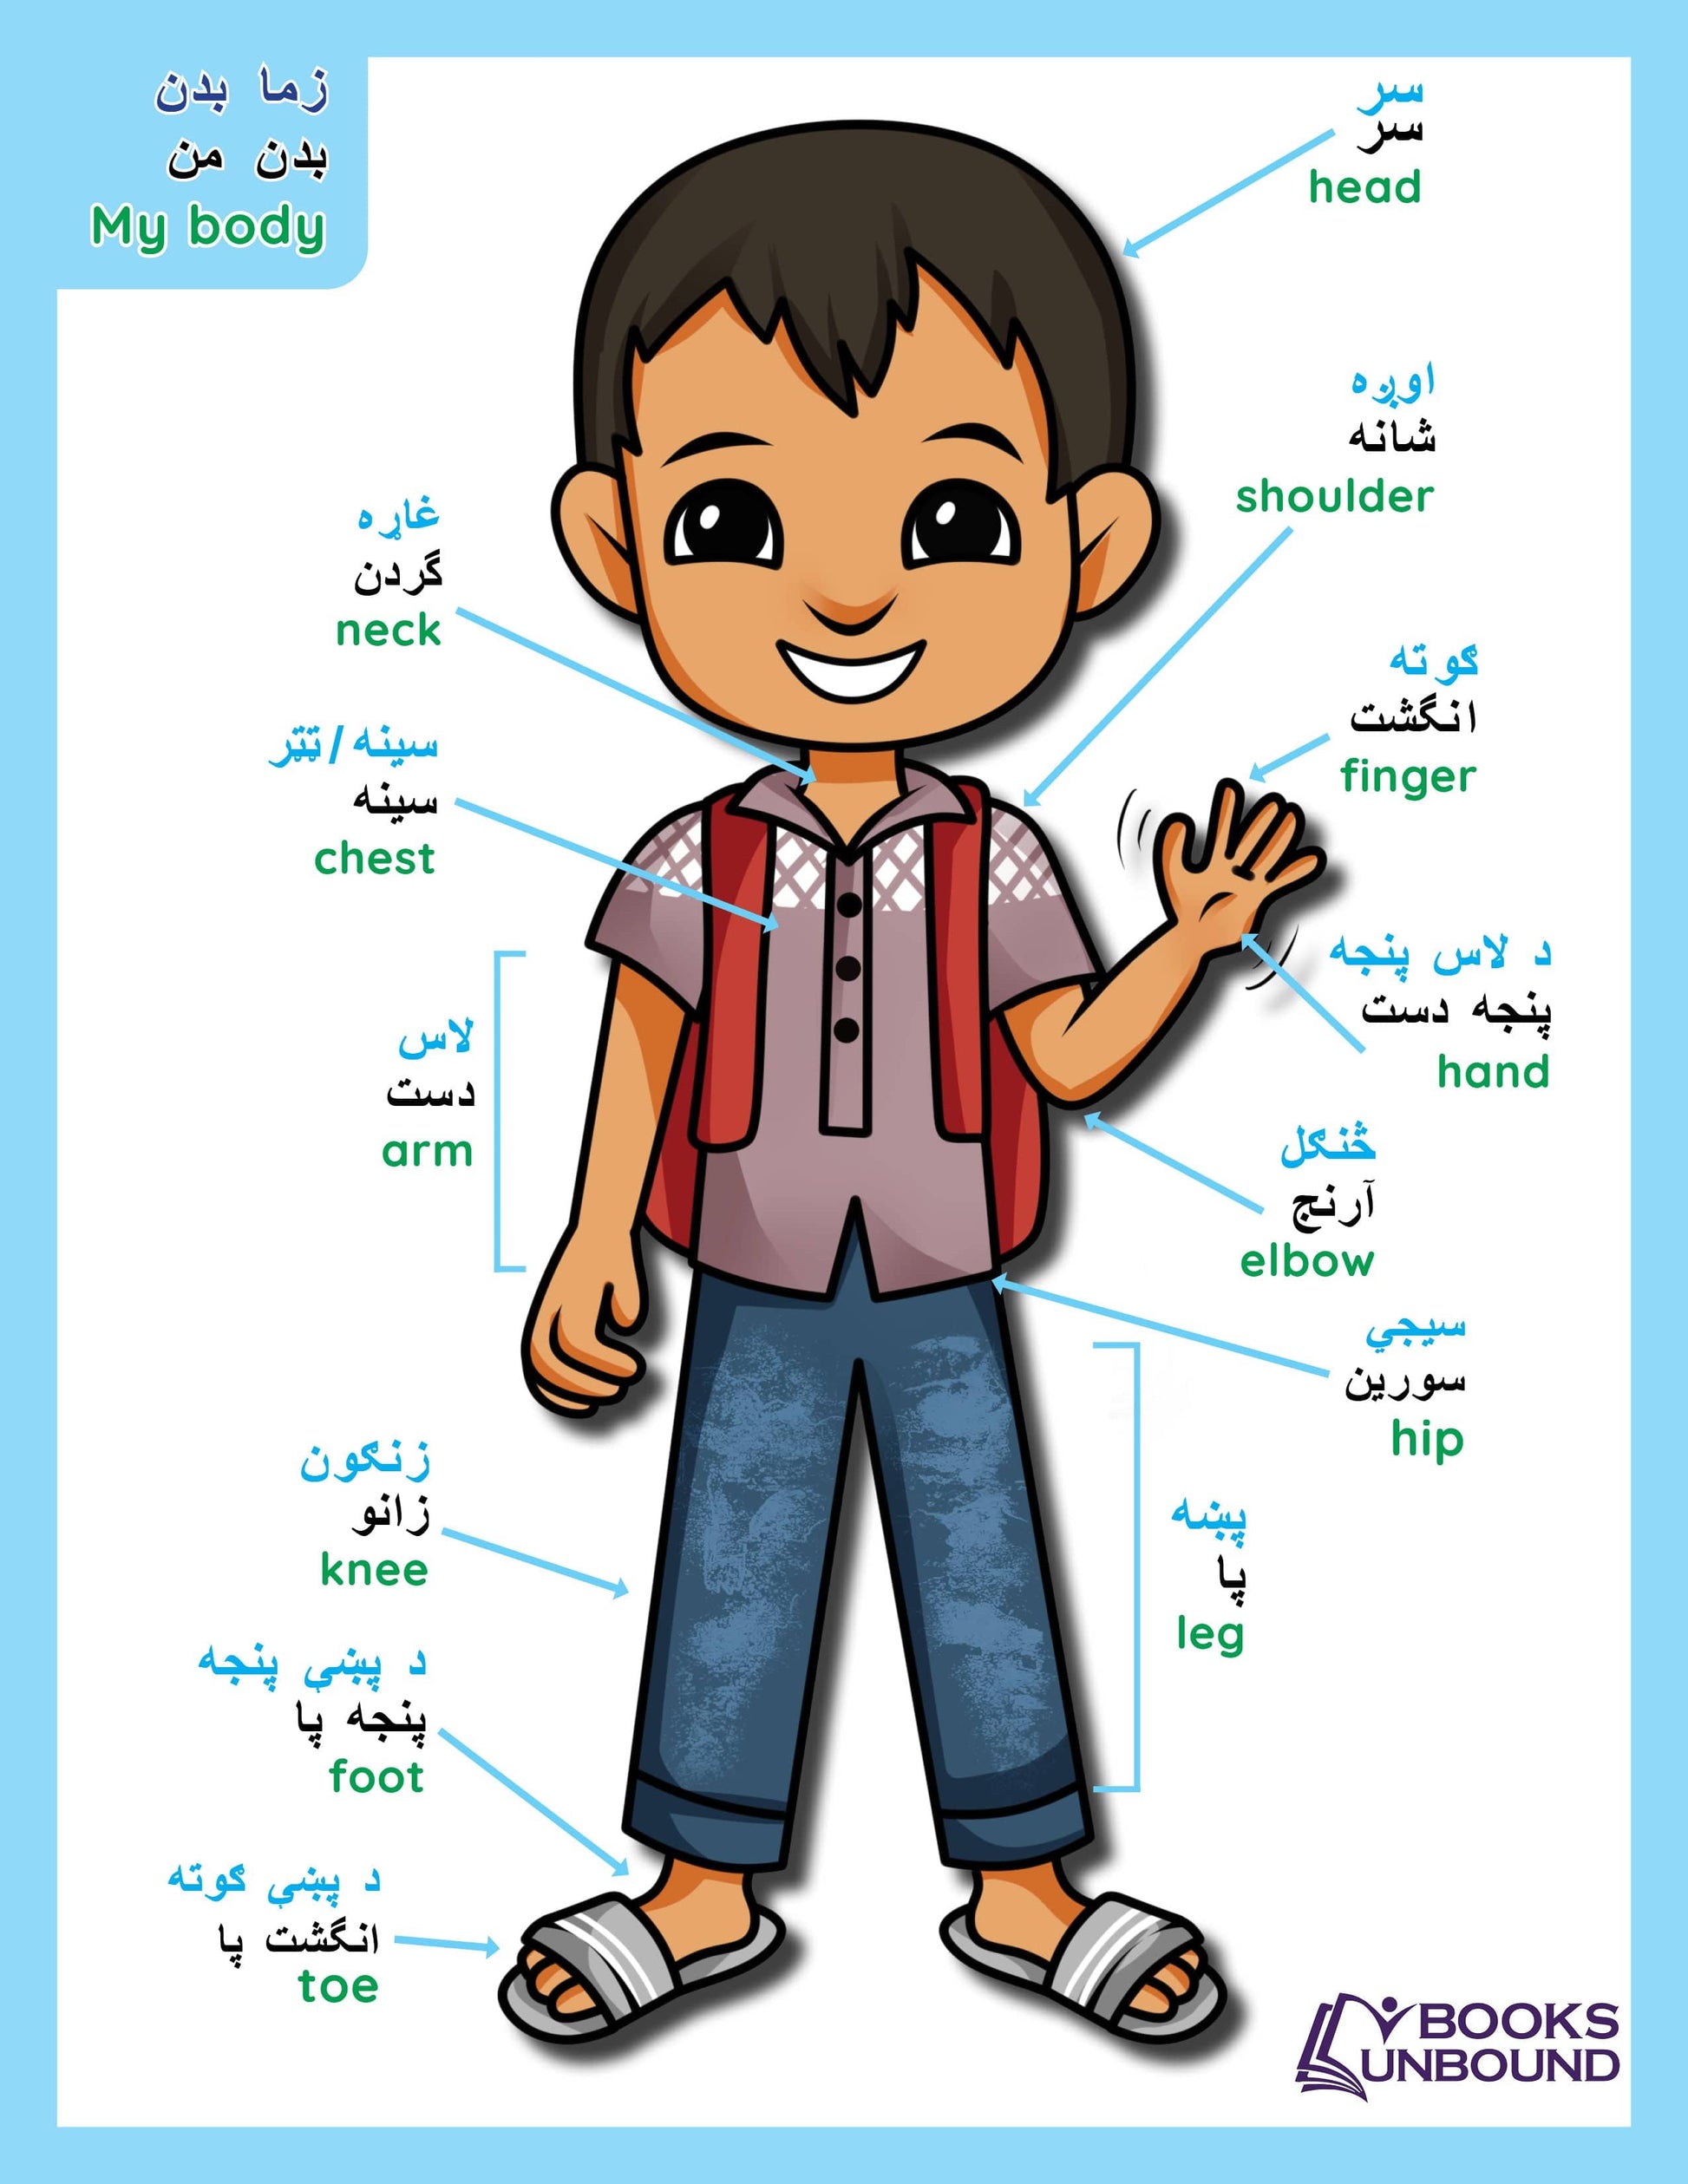 My Body | Afghan Version - perfect for the classroom!